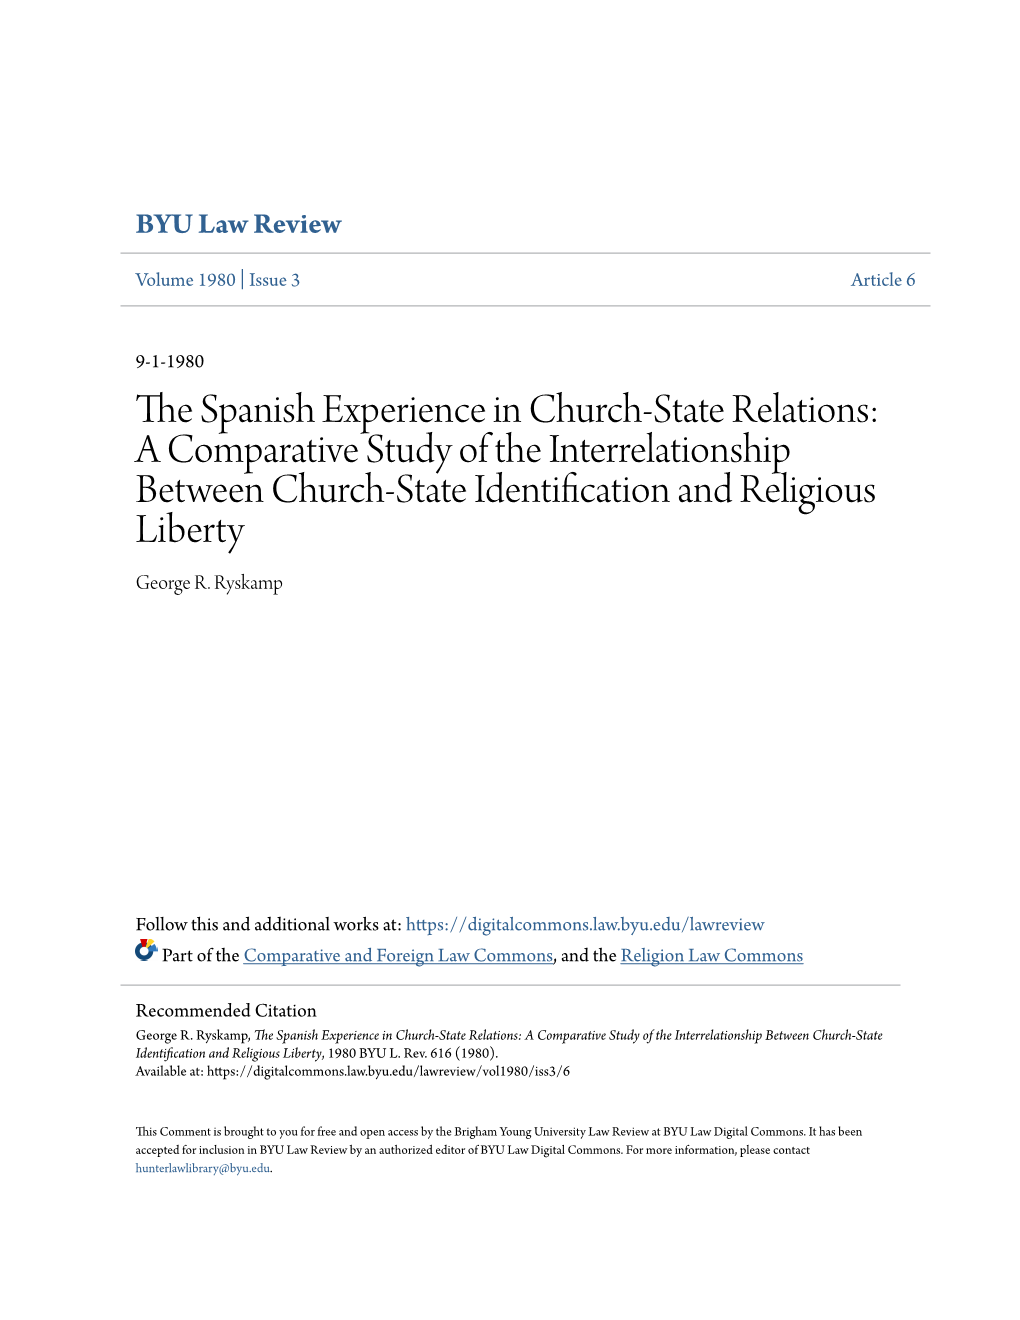 The Spanish Experience in Church-State Relations: a Comparative Study of the Interrelationship Between Church-State Identification and Religious Liberty, 1980 BYU L